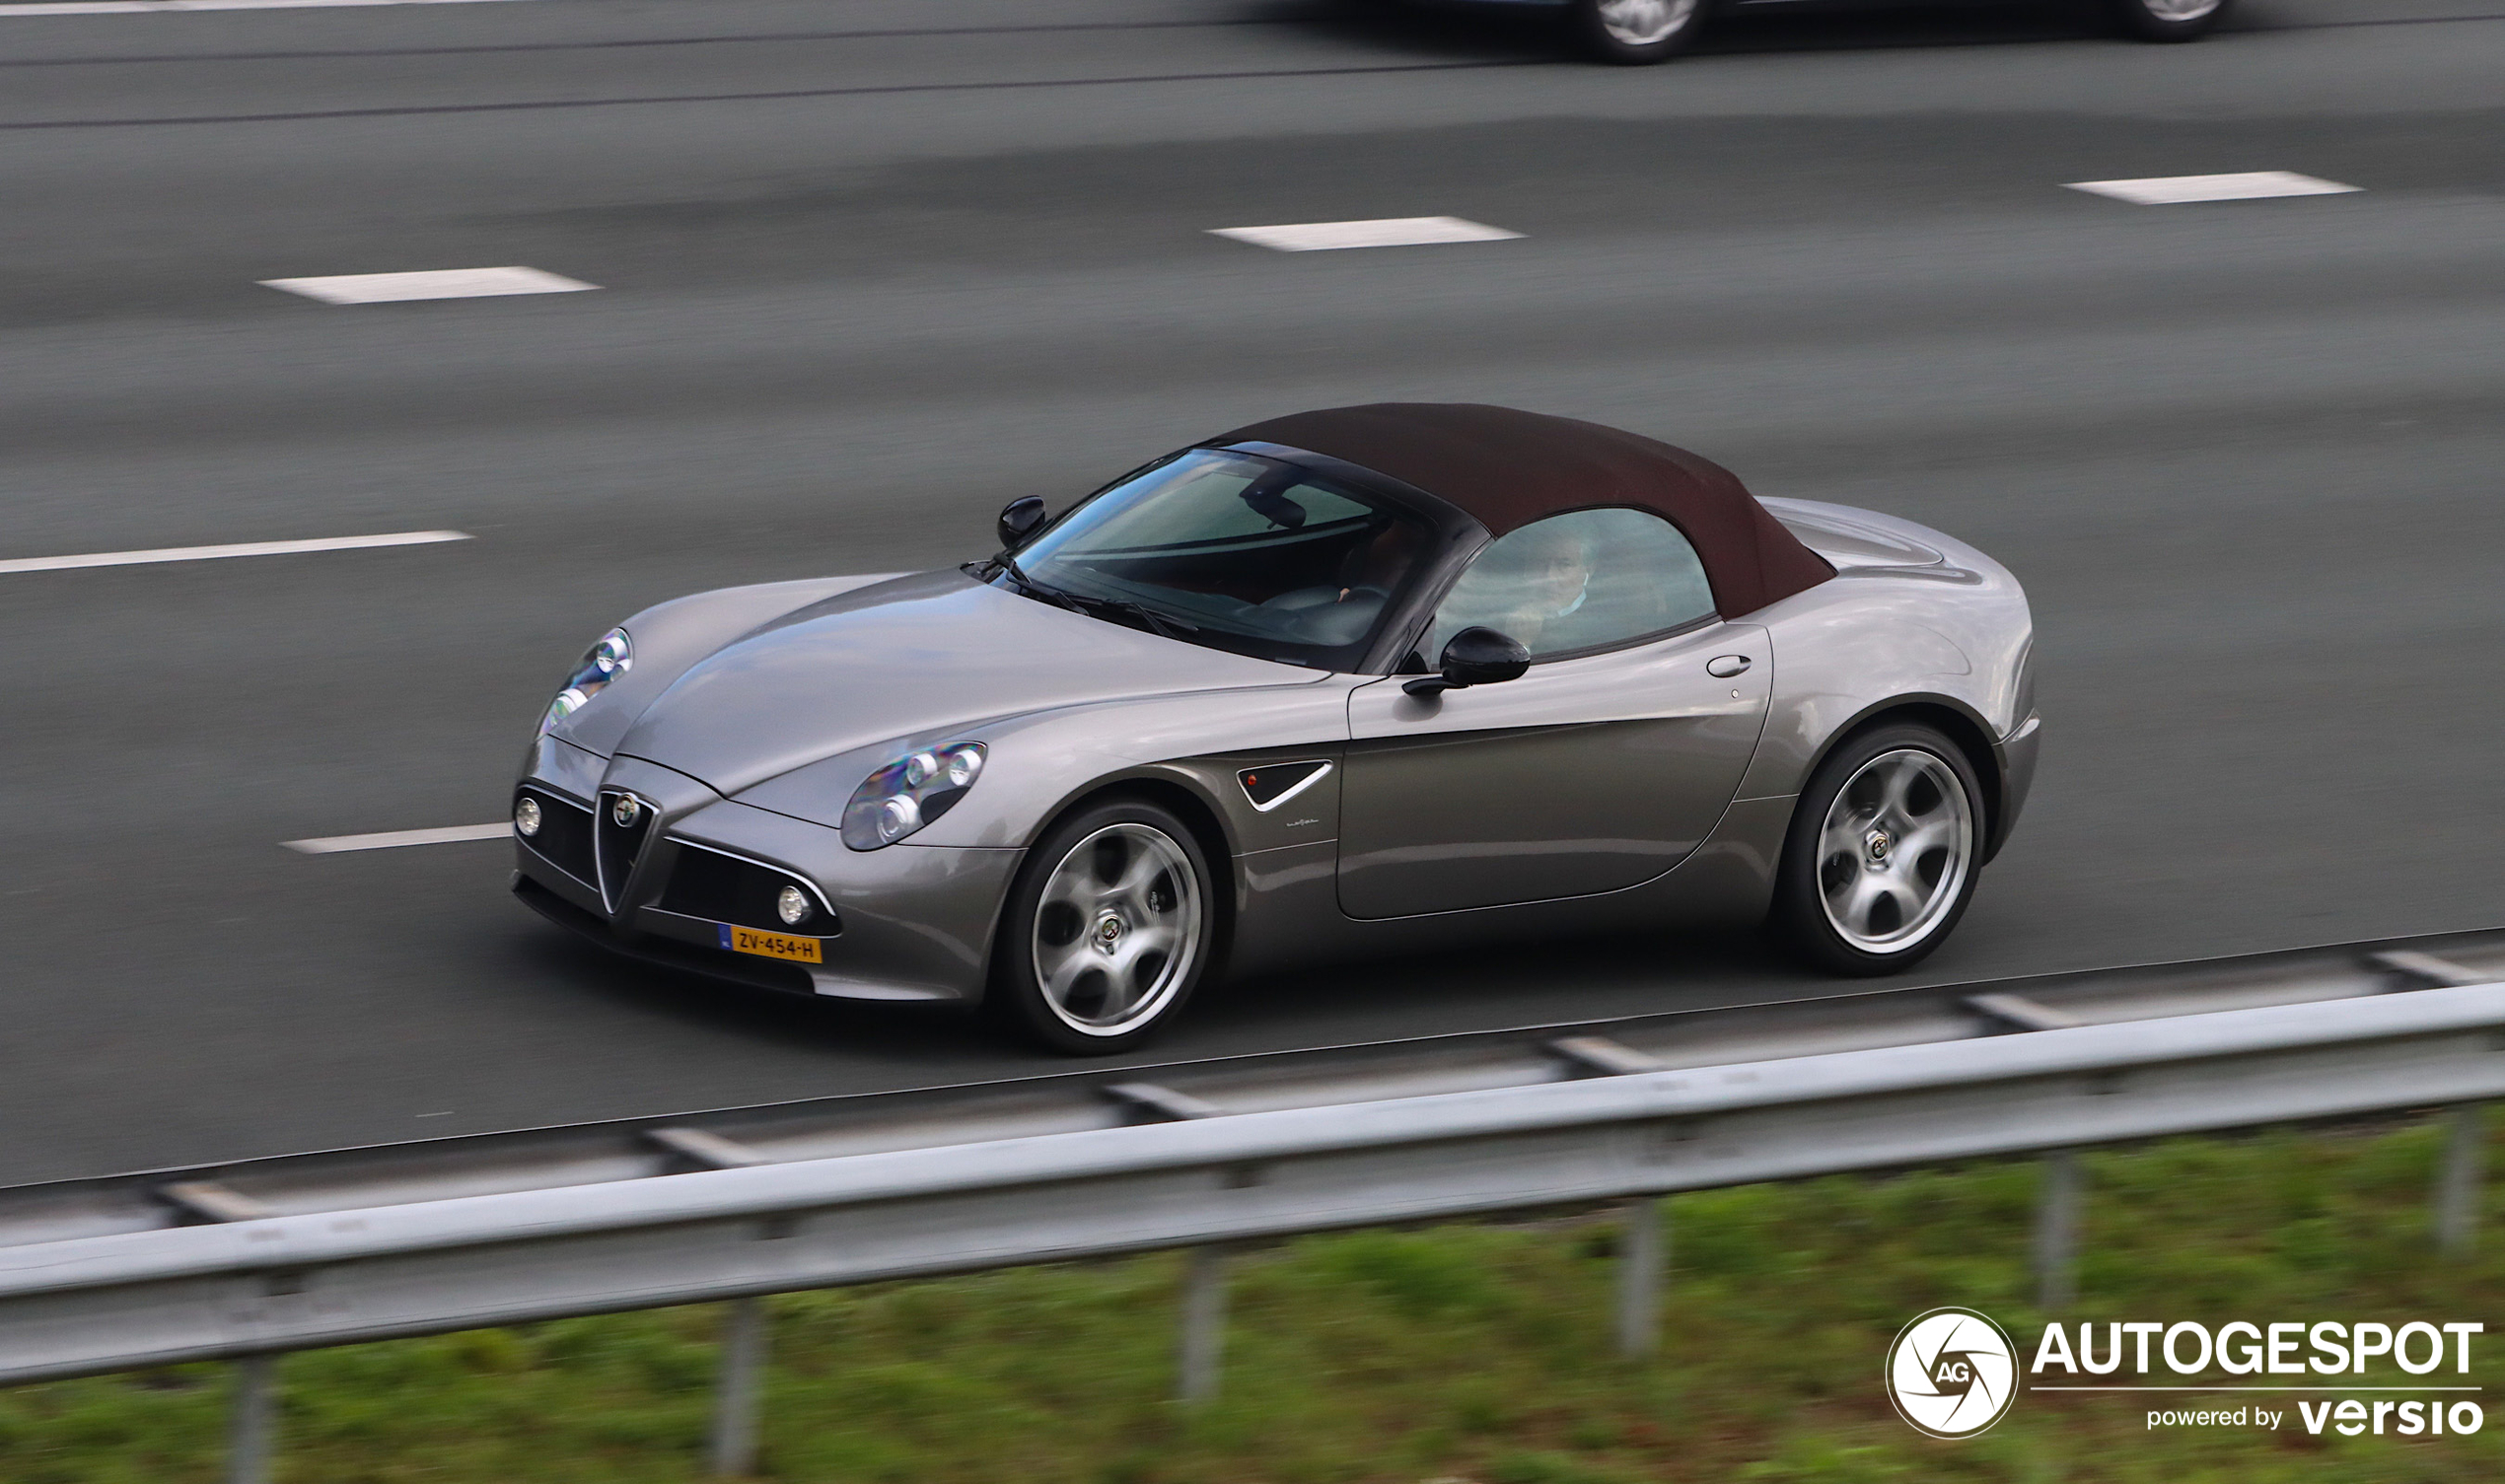 A Beautiful 8C Spyder Spotted on the Highway